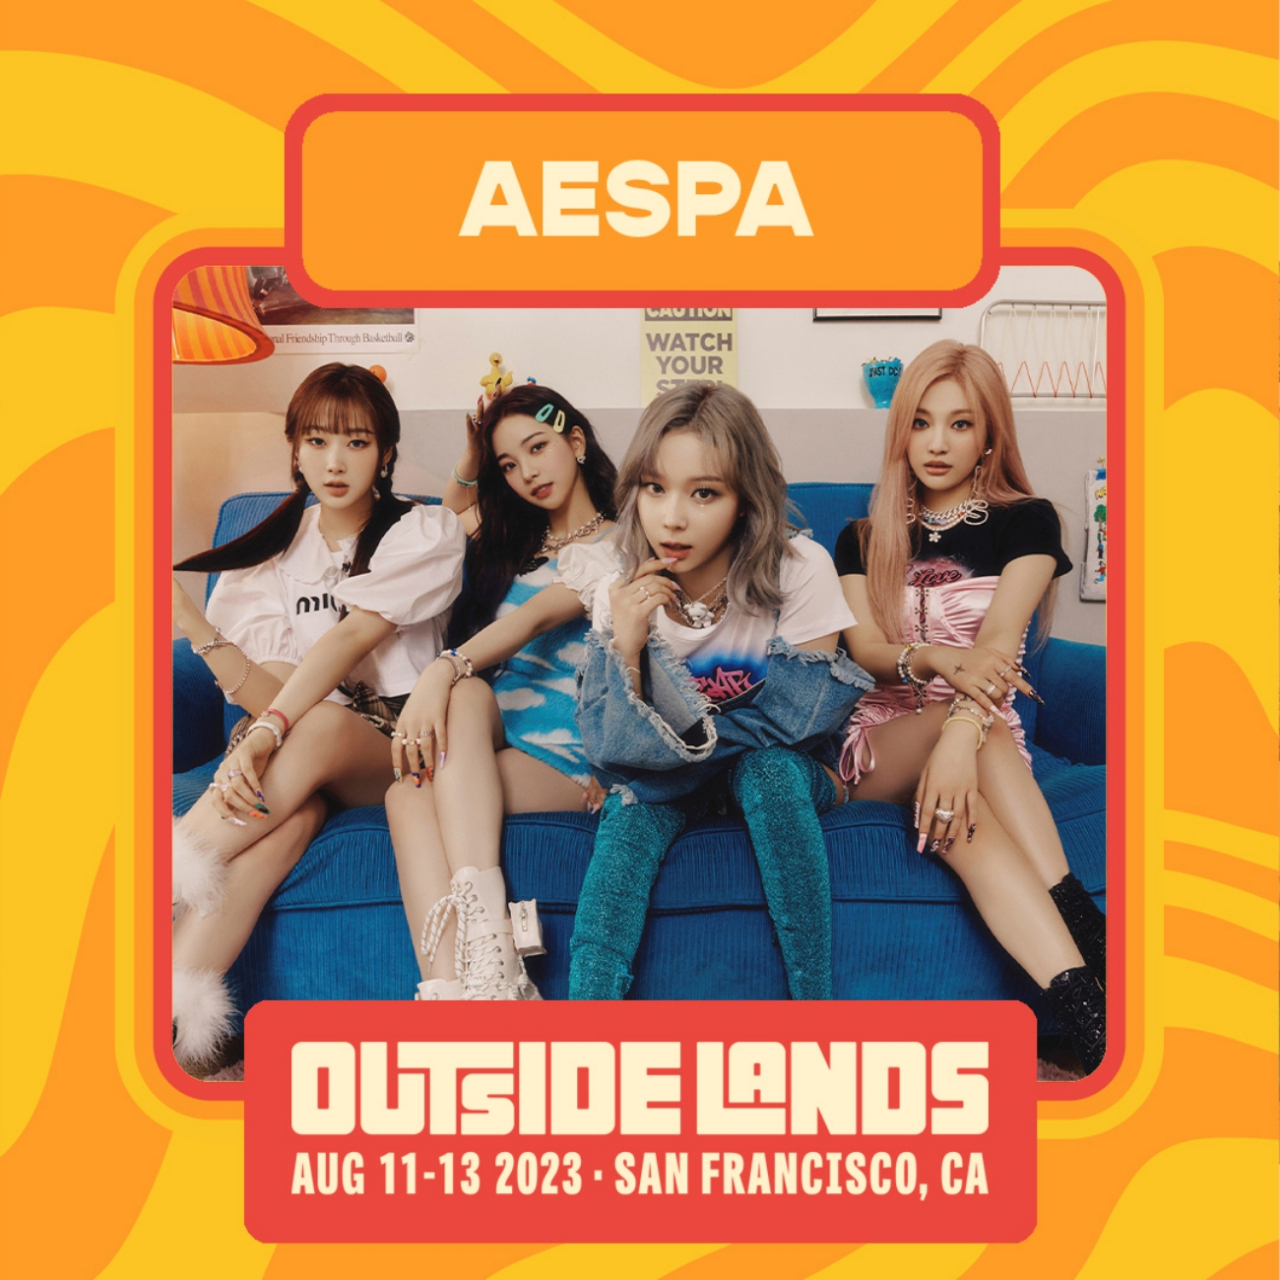 Aespa will perform at Outside Lands Music & Arts Festival on Aug. 11 to 13 at Golden Gate Park in San Francisco. (SM Entertainment)